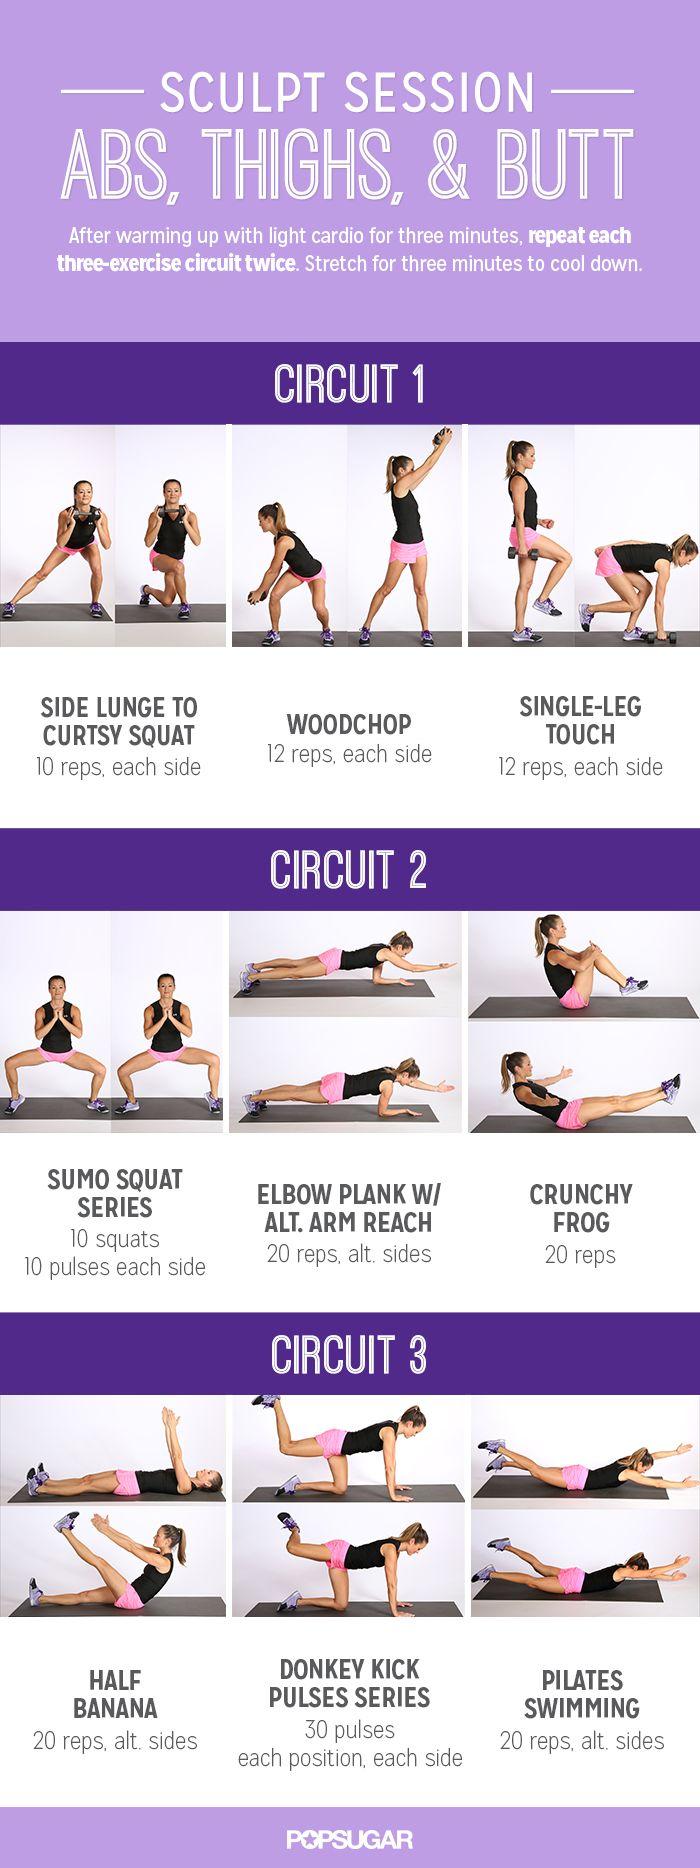 Wedding - Printable Workout: Sculpt Session For Abs And Glutes